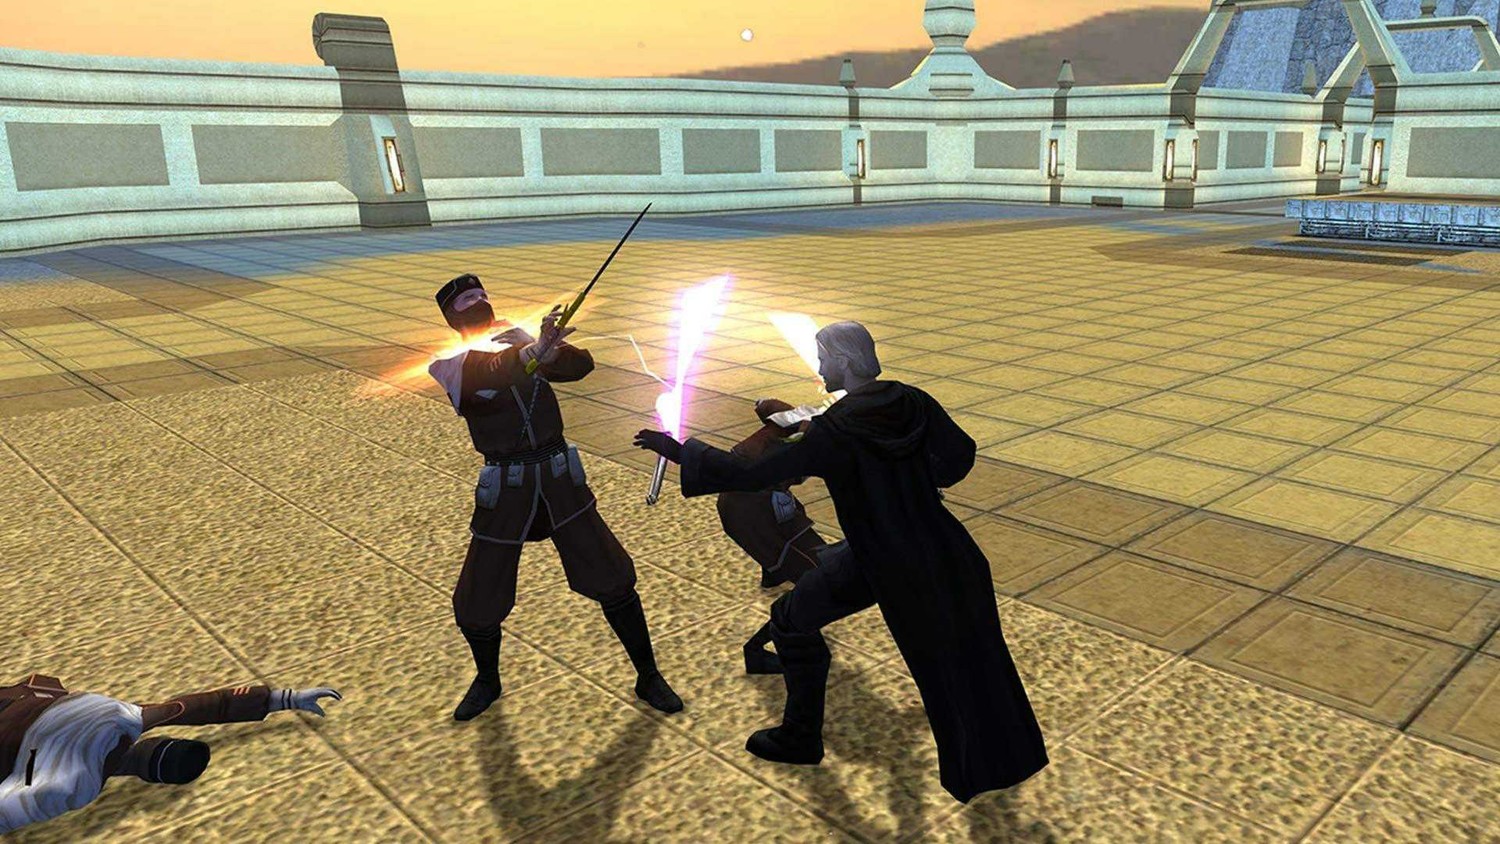 Игра стар варс котор. Star Wars Knights of the old Republic 2. Star Wars : Knights of the old Republic. Star Wars: kotor Knights of the old Republic. Star Wars: Knights of the old Republic II – the Sith Lords.